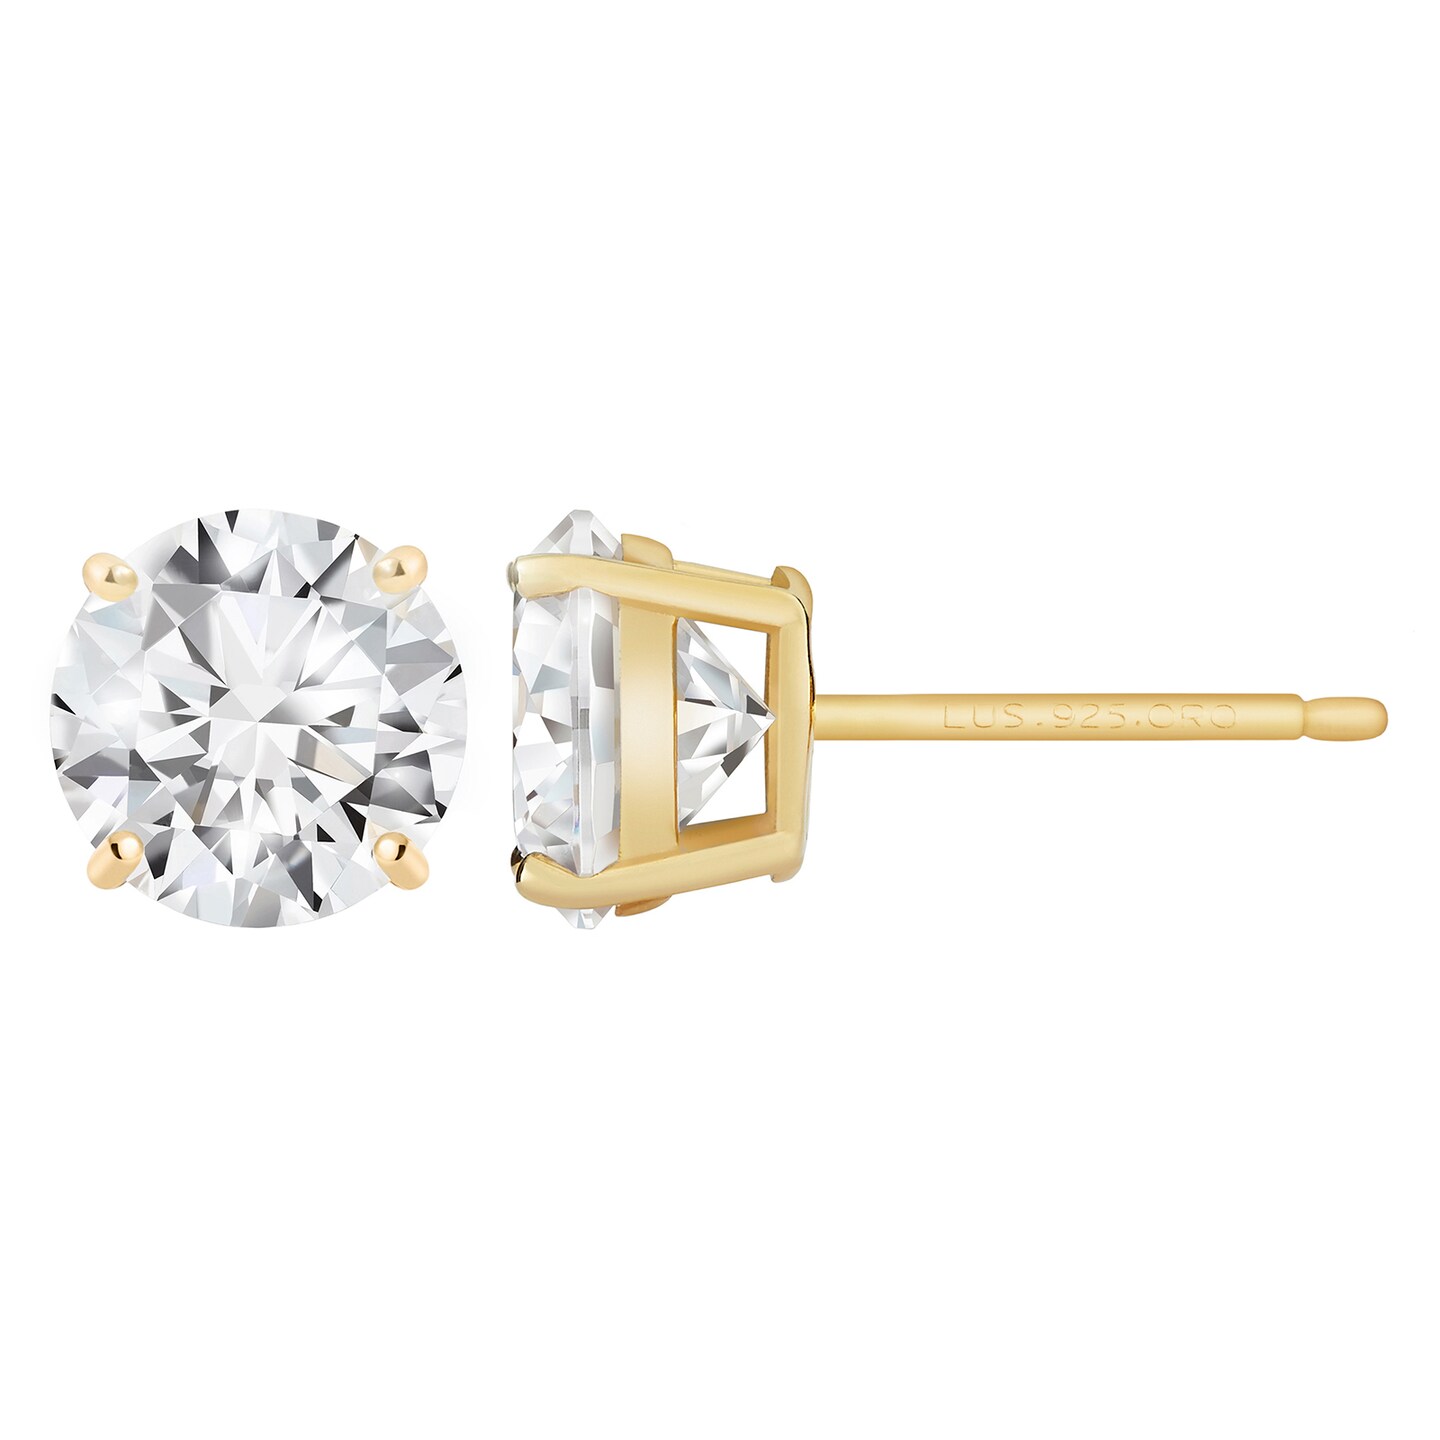 Lusoro 925 Sterling Silver Gold Plated Round Cut AAA Cubic Zirconia Stud Earrings - 1/2 Carat Total Weight CZ